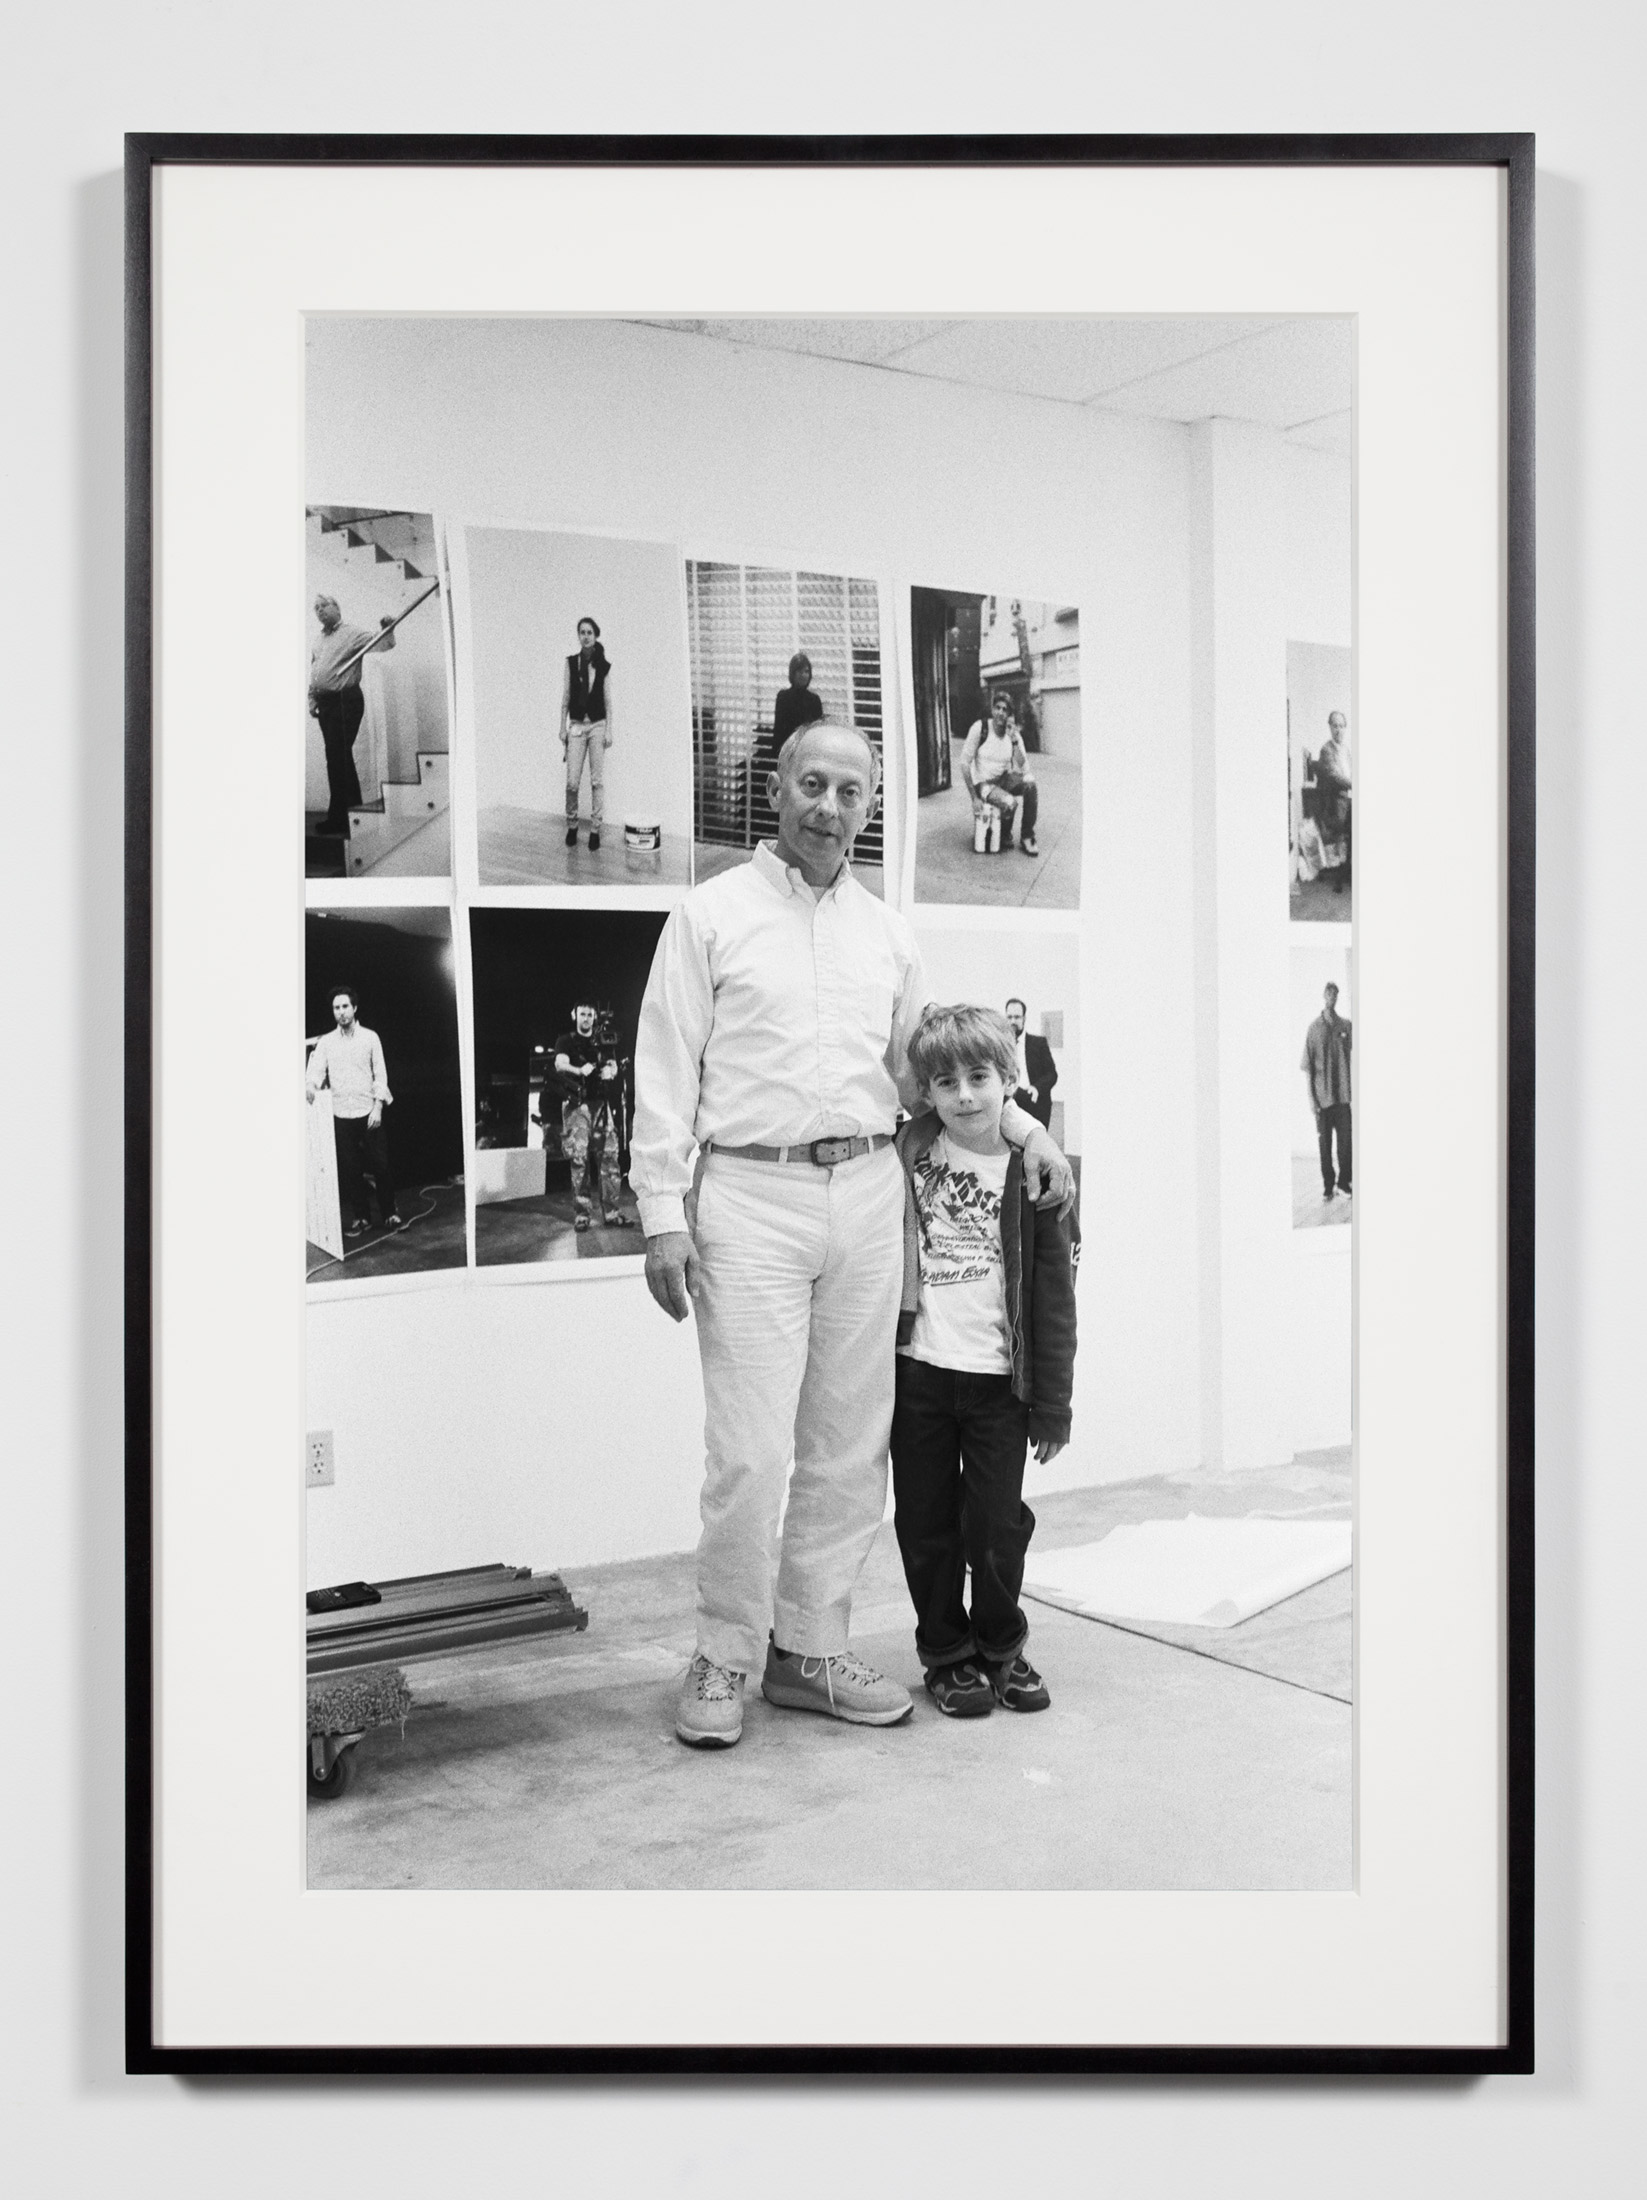   Publisher with Son, Los Angeles, California, April 3, 2009   2011  Epson Ultrachrome K3 archival ink jet print on Hahnemühle Photo Rag paper  36 3/8 x 26 3/8 inches   Industrial Portraits, 2008–    A Diagram of Forces, 2011     